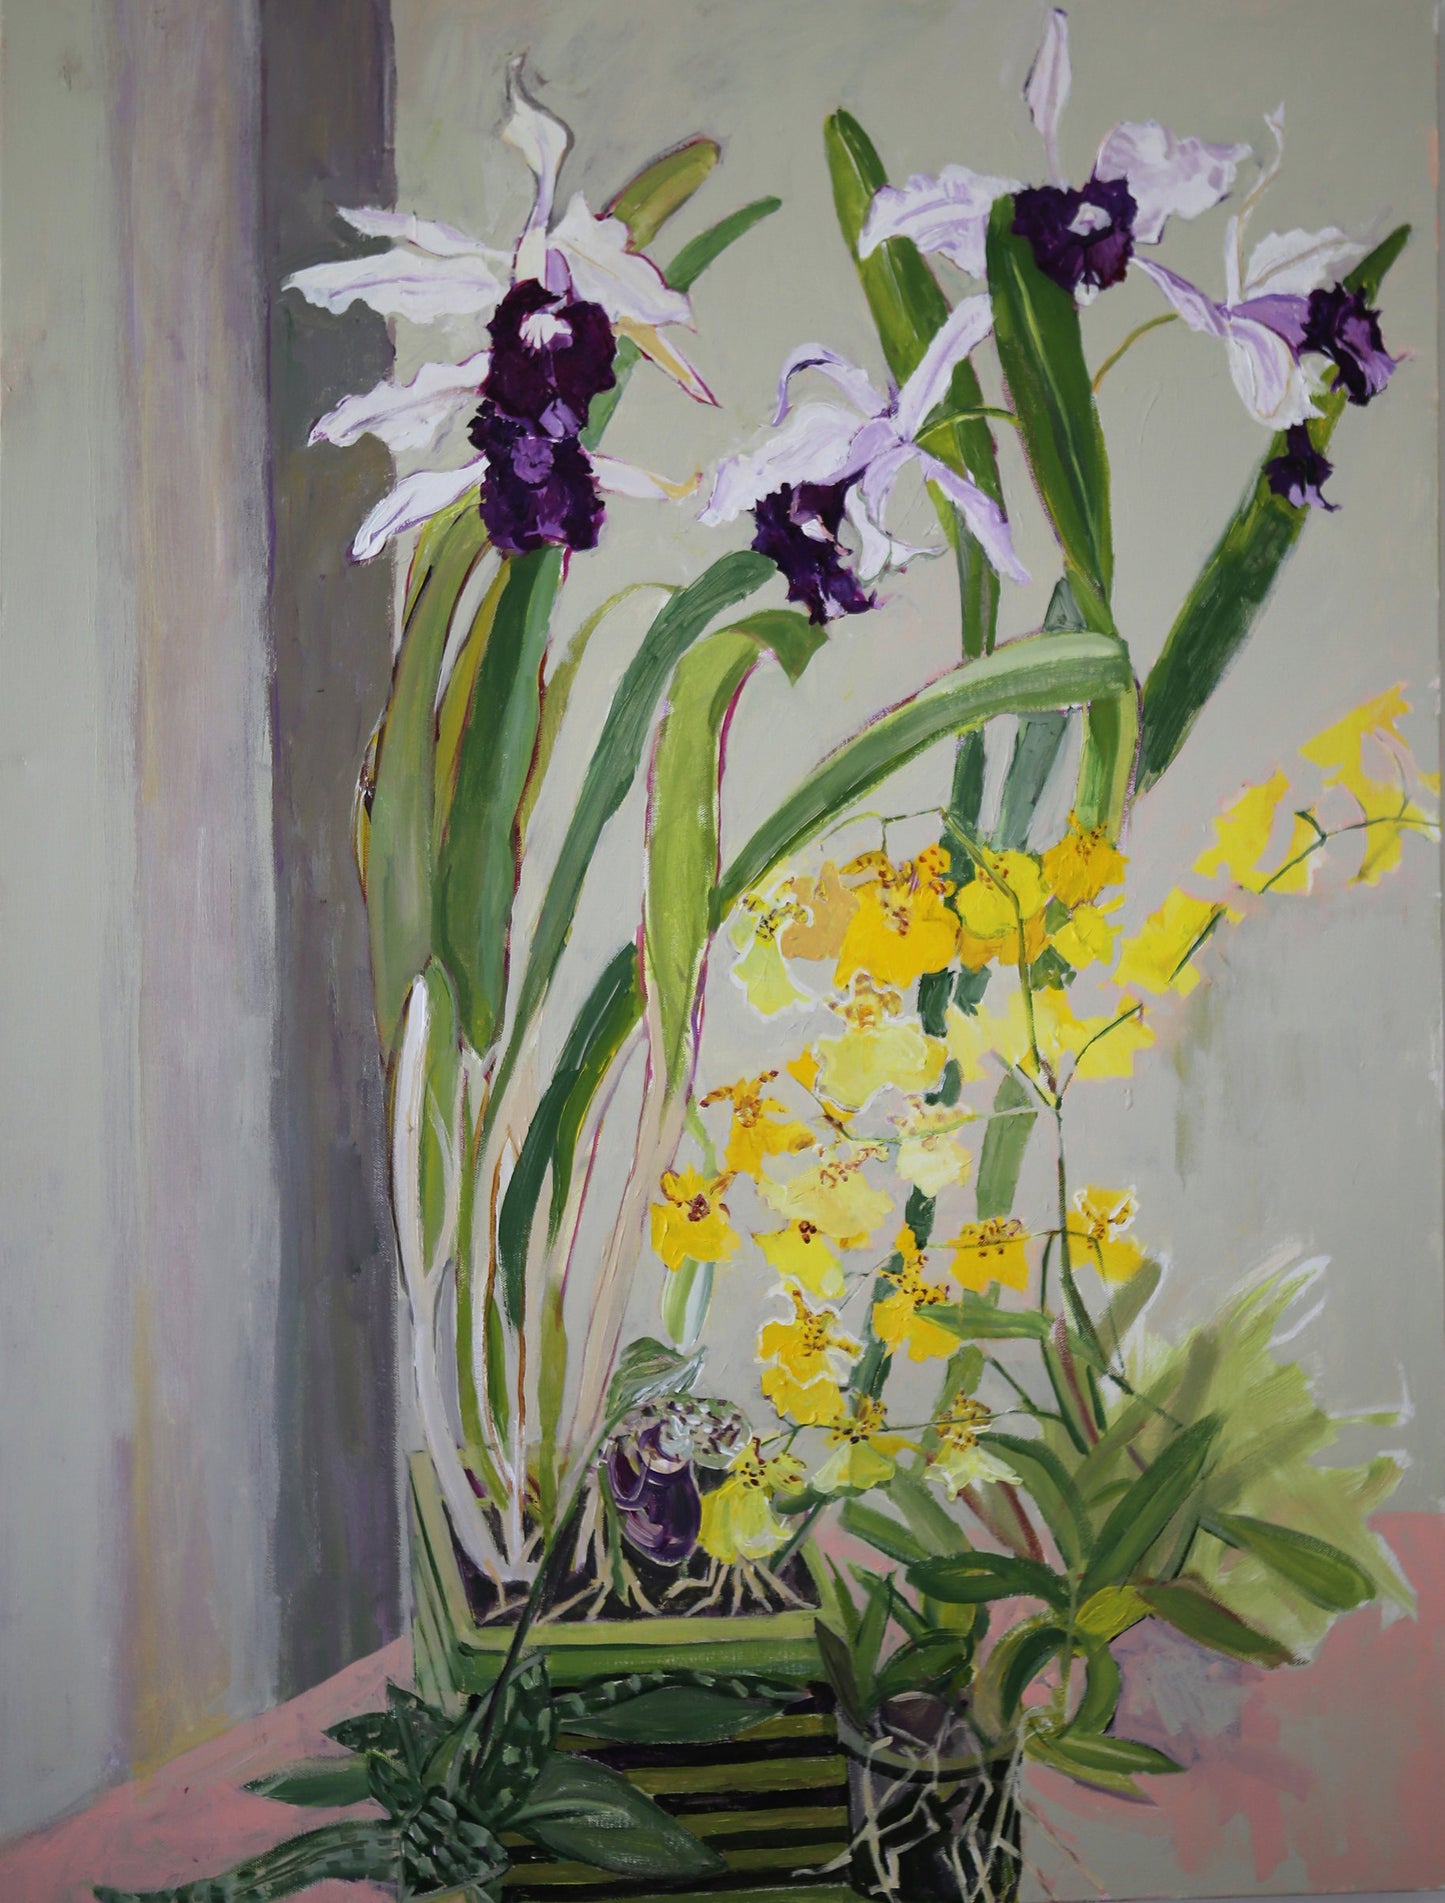 c-lb335-COVID-Norms-Orchids-05-2020-30x40-acrylic-flower-paintings-by-Lila-Bacon